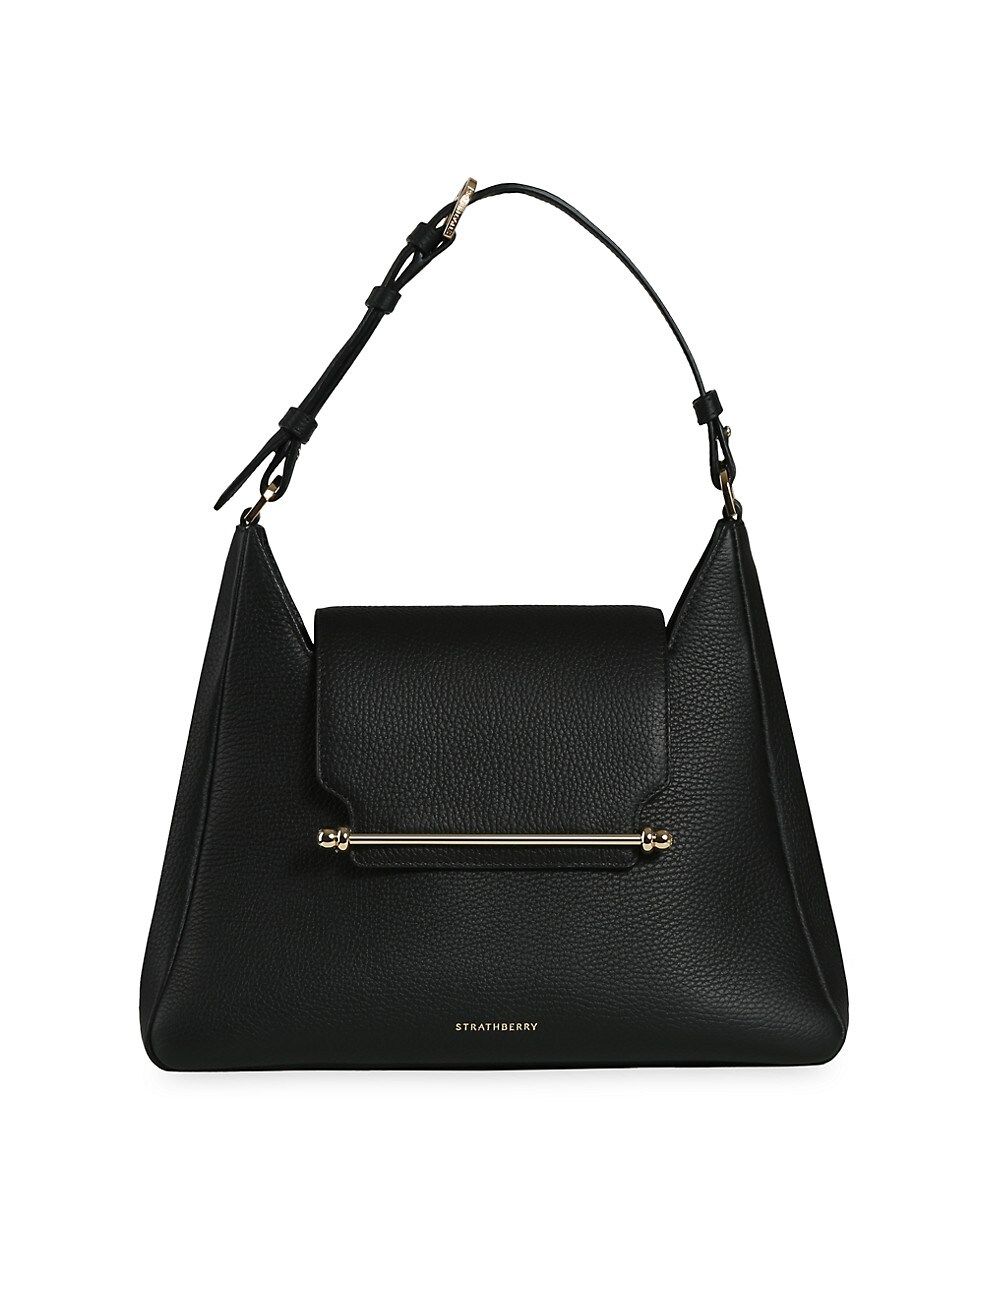 Strathberry Multrees Leather Hobo Bag | Saks Fifth Avenue